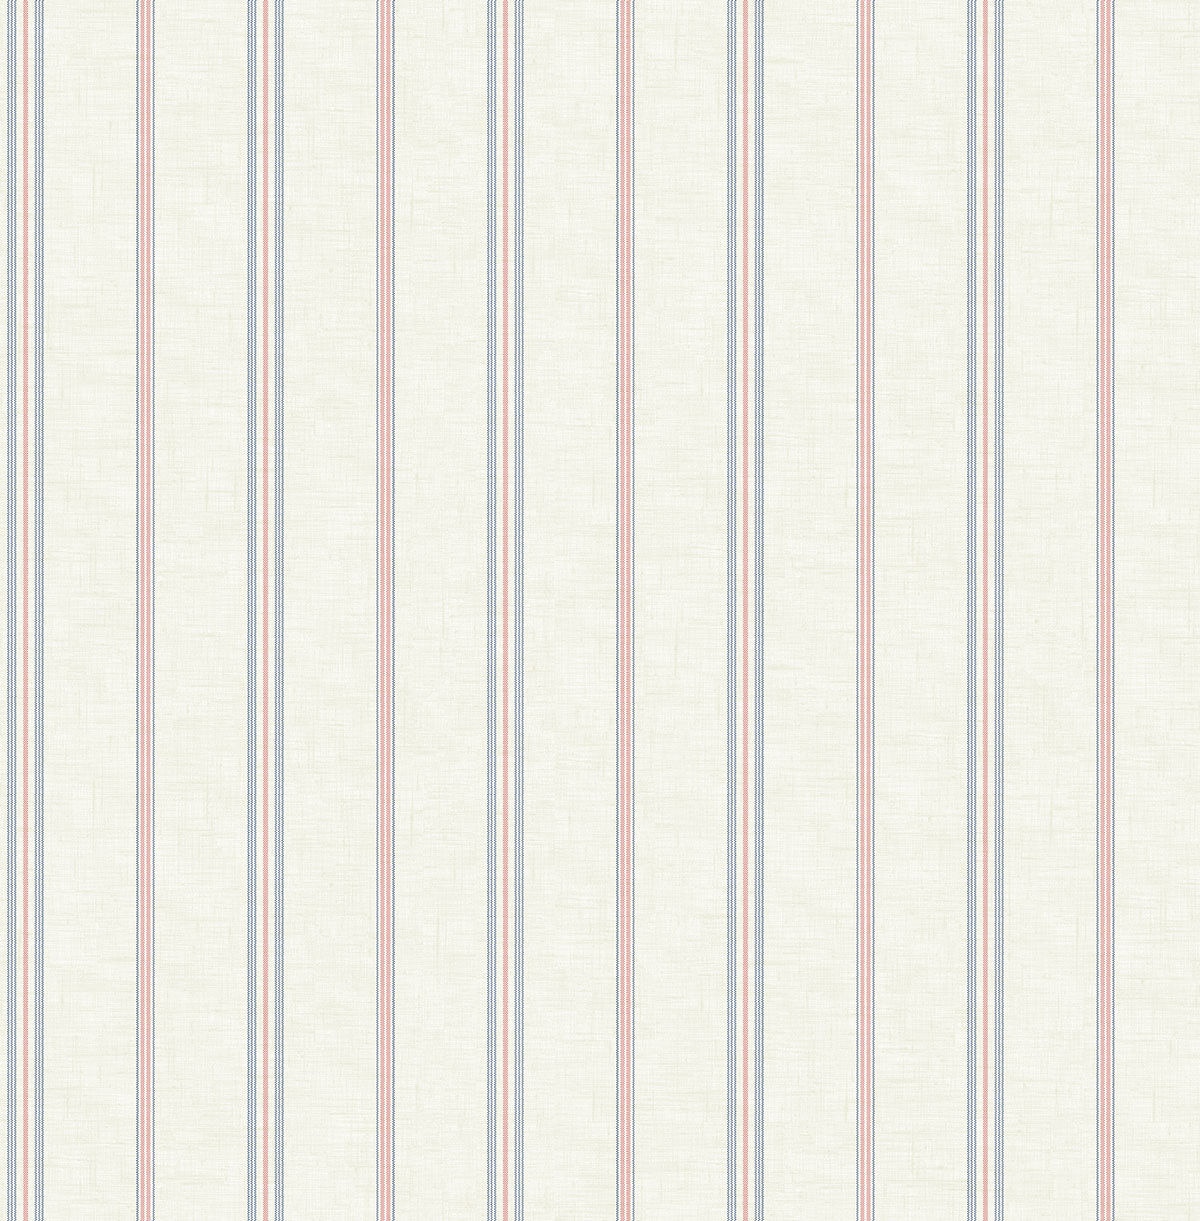 Anaglypta White Cameo Stripe Wallpaper - RightwayDirect.co.uk